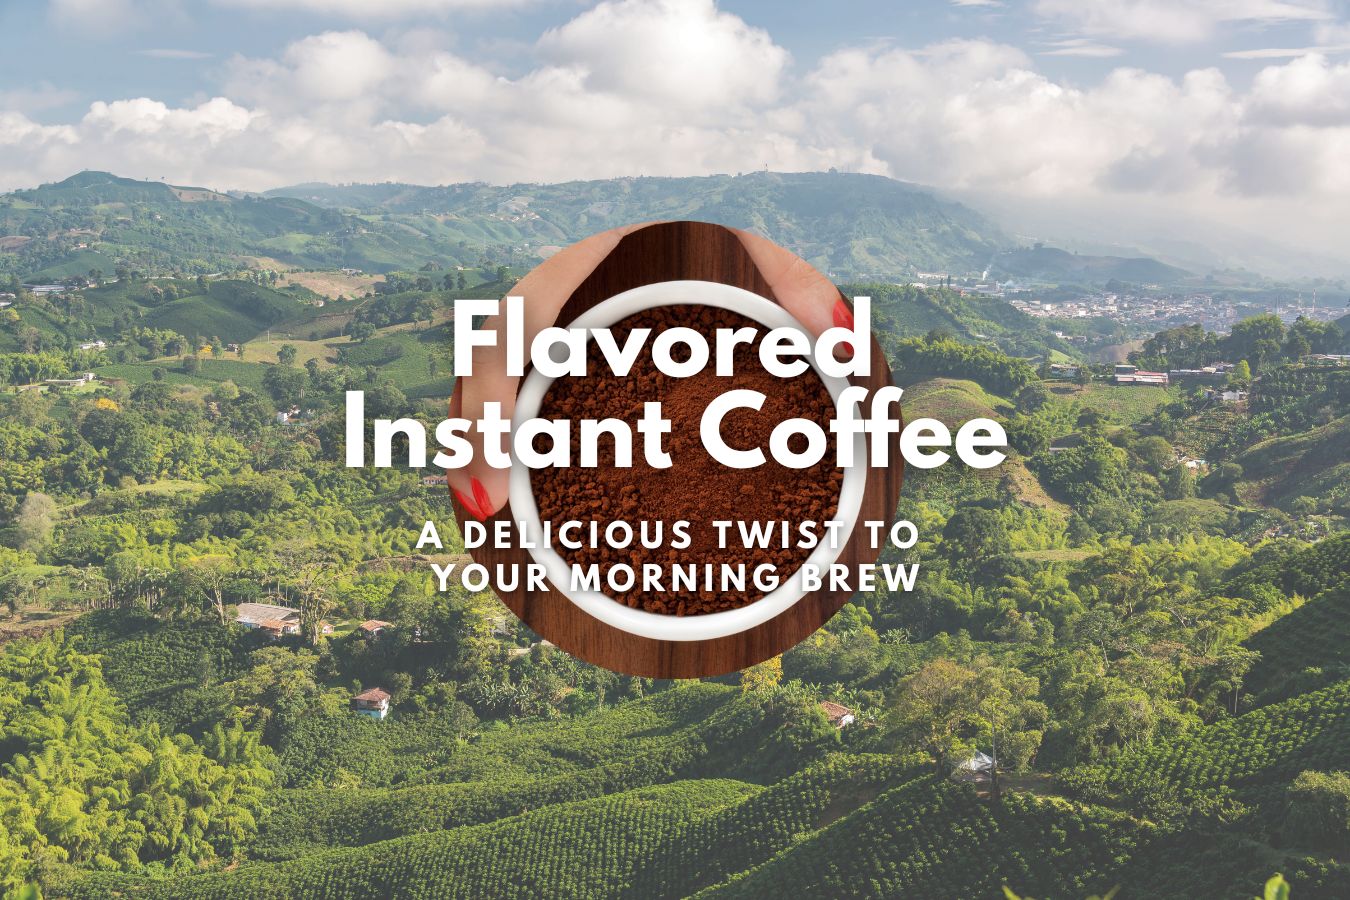 Flavored Instant Coffee: A Delicious Twist to Your Morning Brew